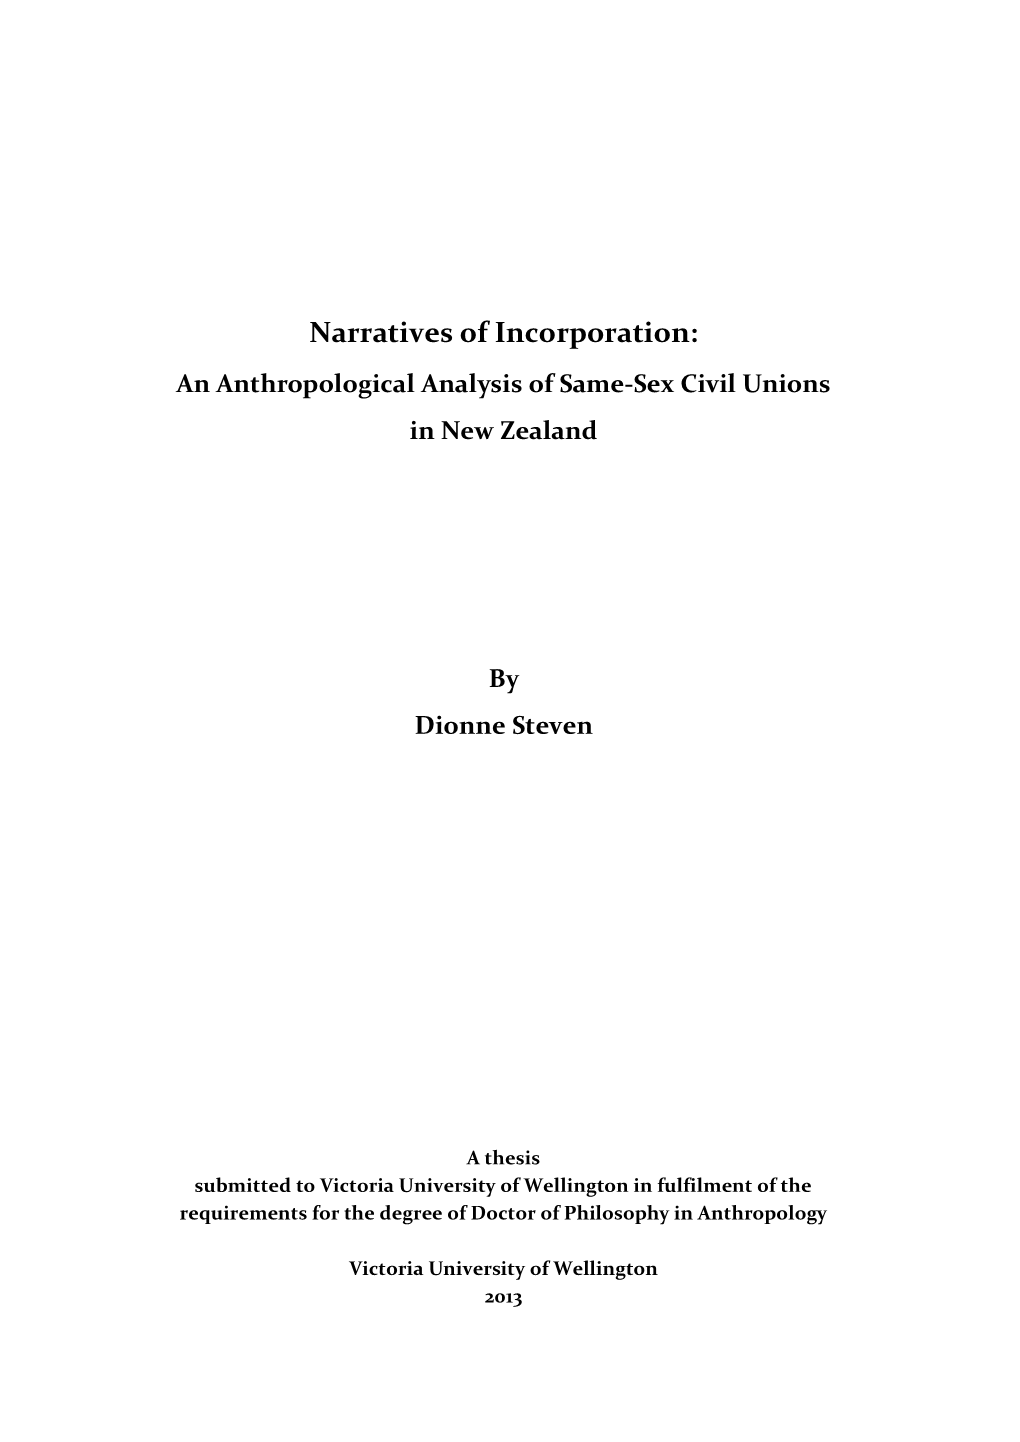 Narratives of Incorporation: an Anthropological Analysis of Same-Sex Civil Unions in New Zealand